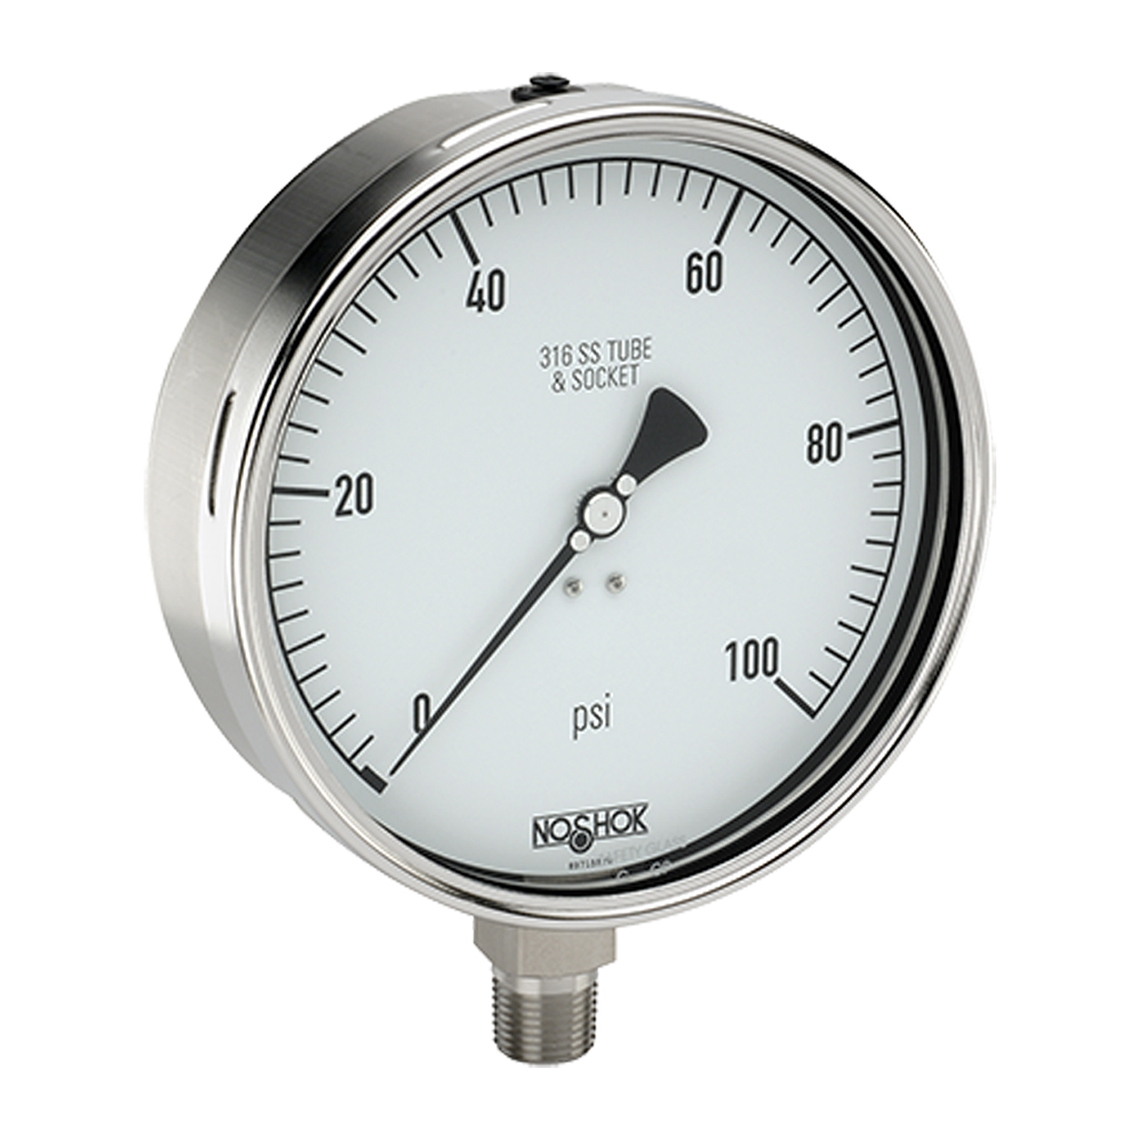 60-400-30-psi 400/500 Series All Stainless Steel Dry and Liquid Filled Pressure Gauges